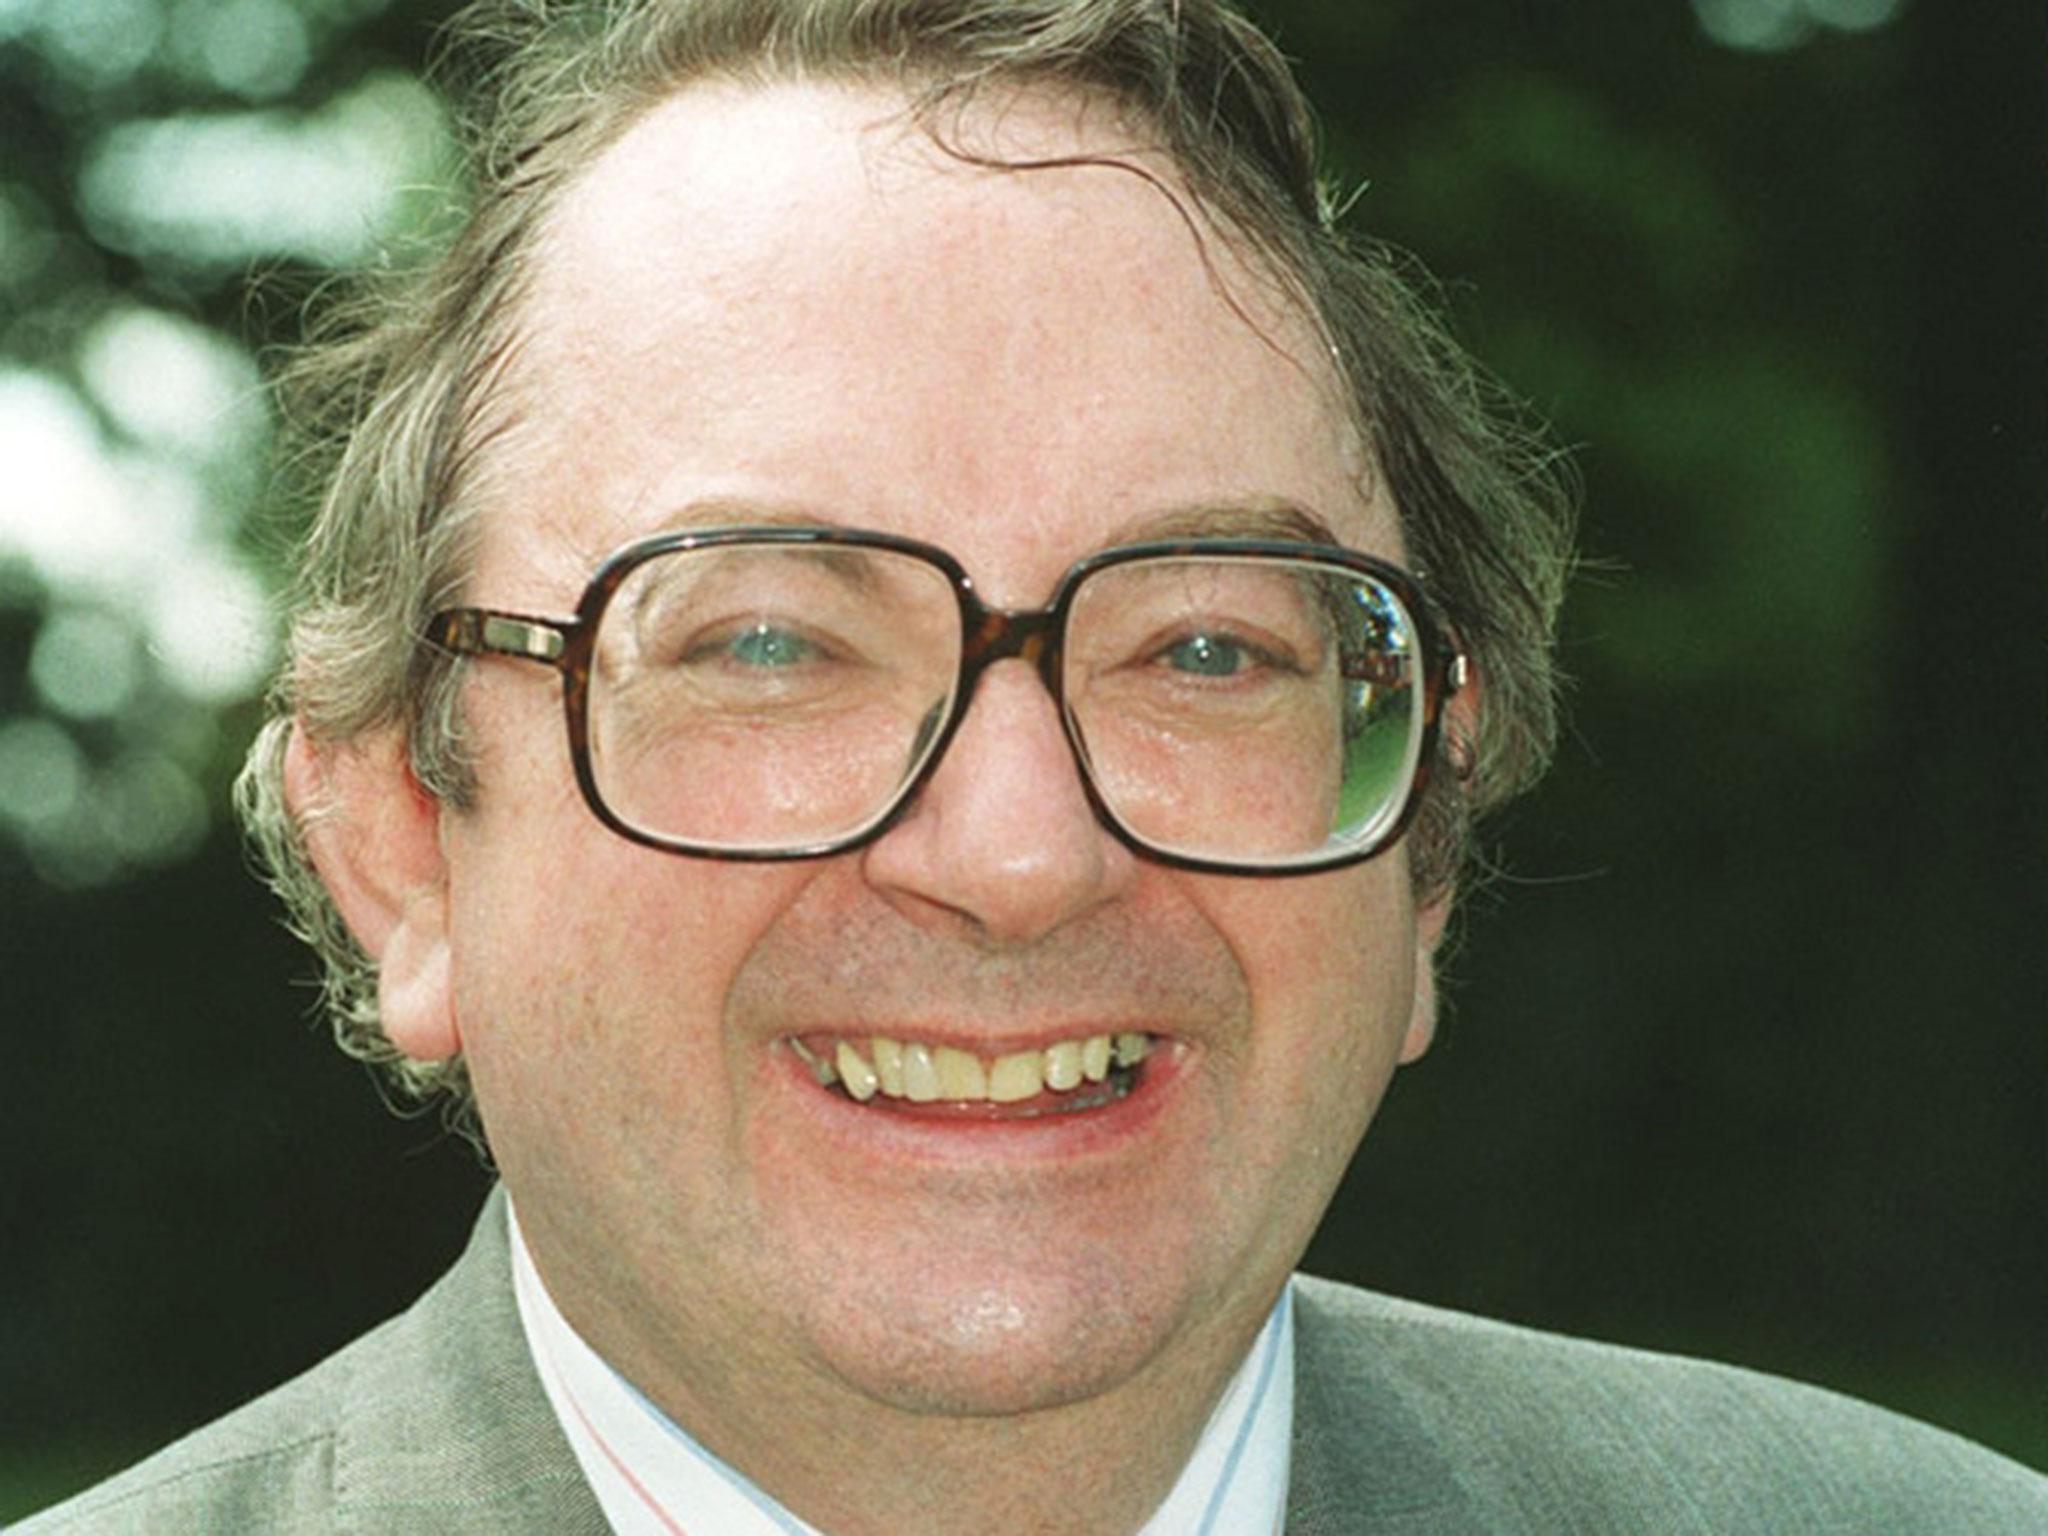 Ian McCaskill was known for his Scottish accent at a time when it was not common for presenters to have regional accents